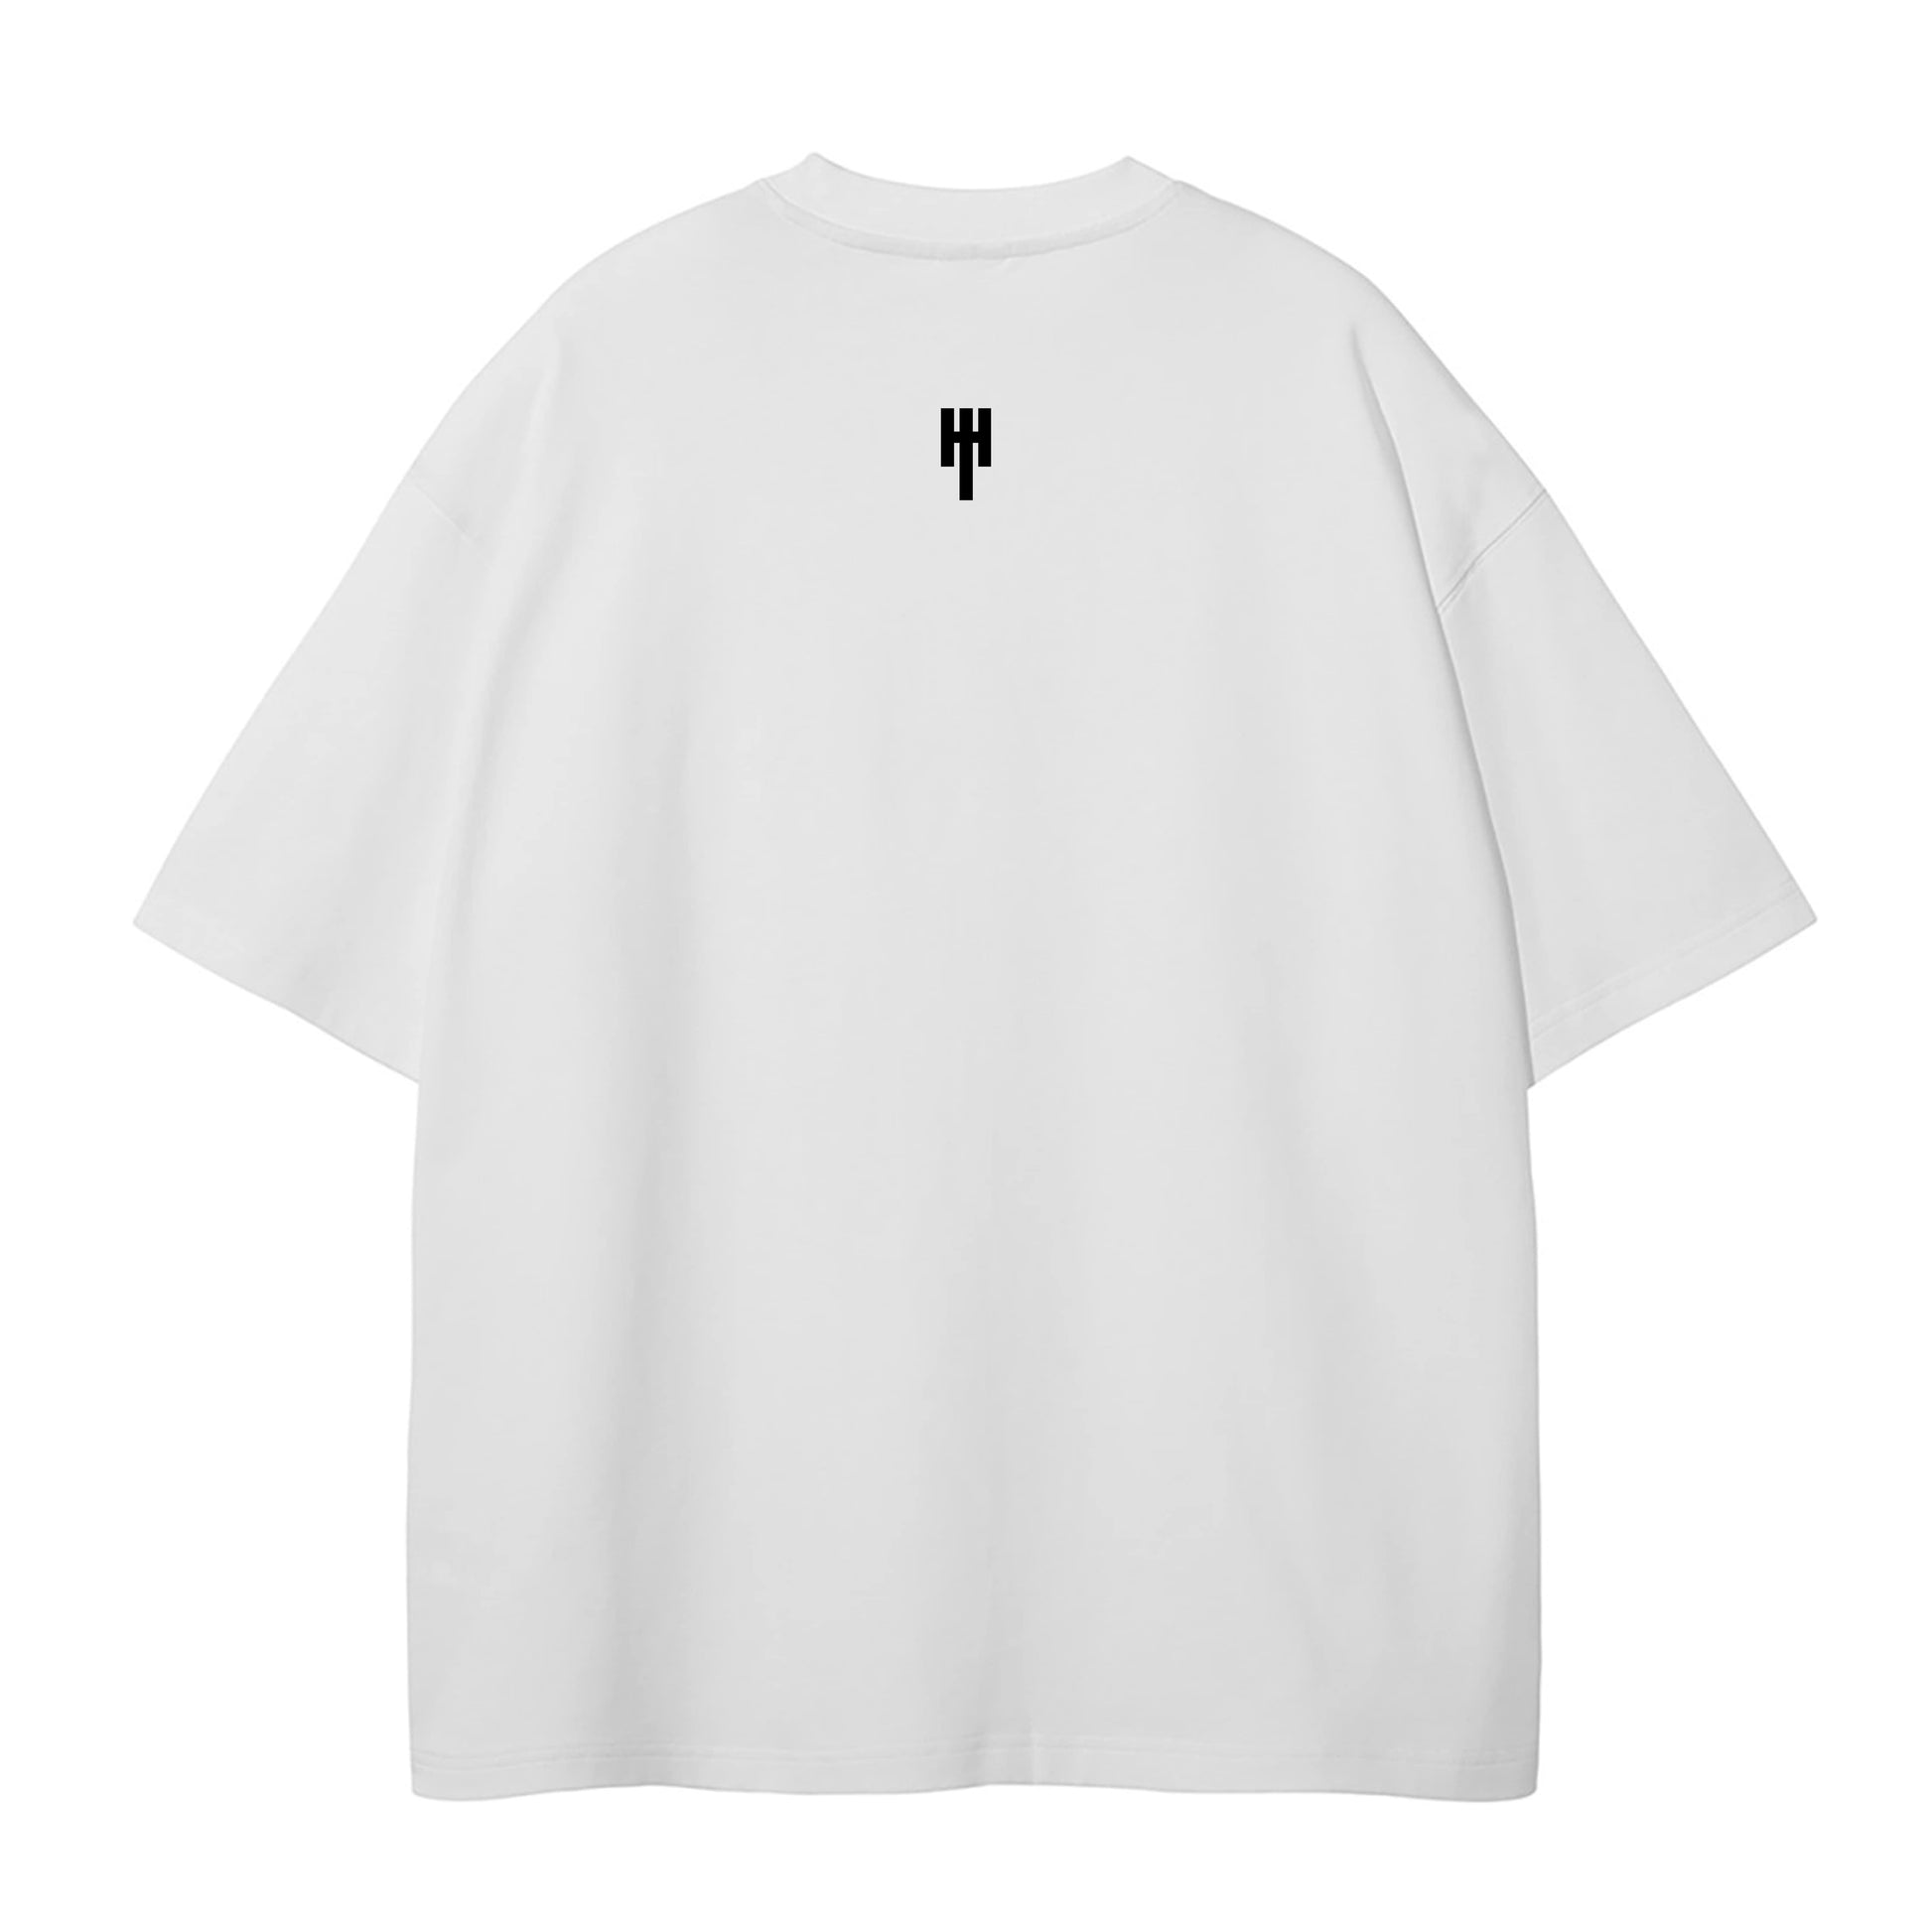 Back view of an oversized white t-shirt with our company emblem centered beneath the neckline.